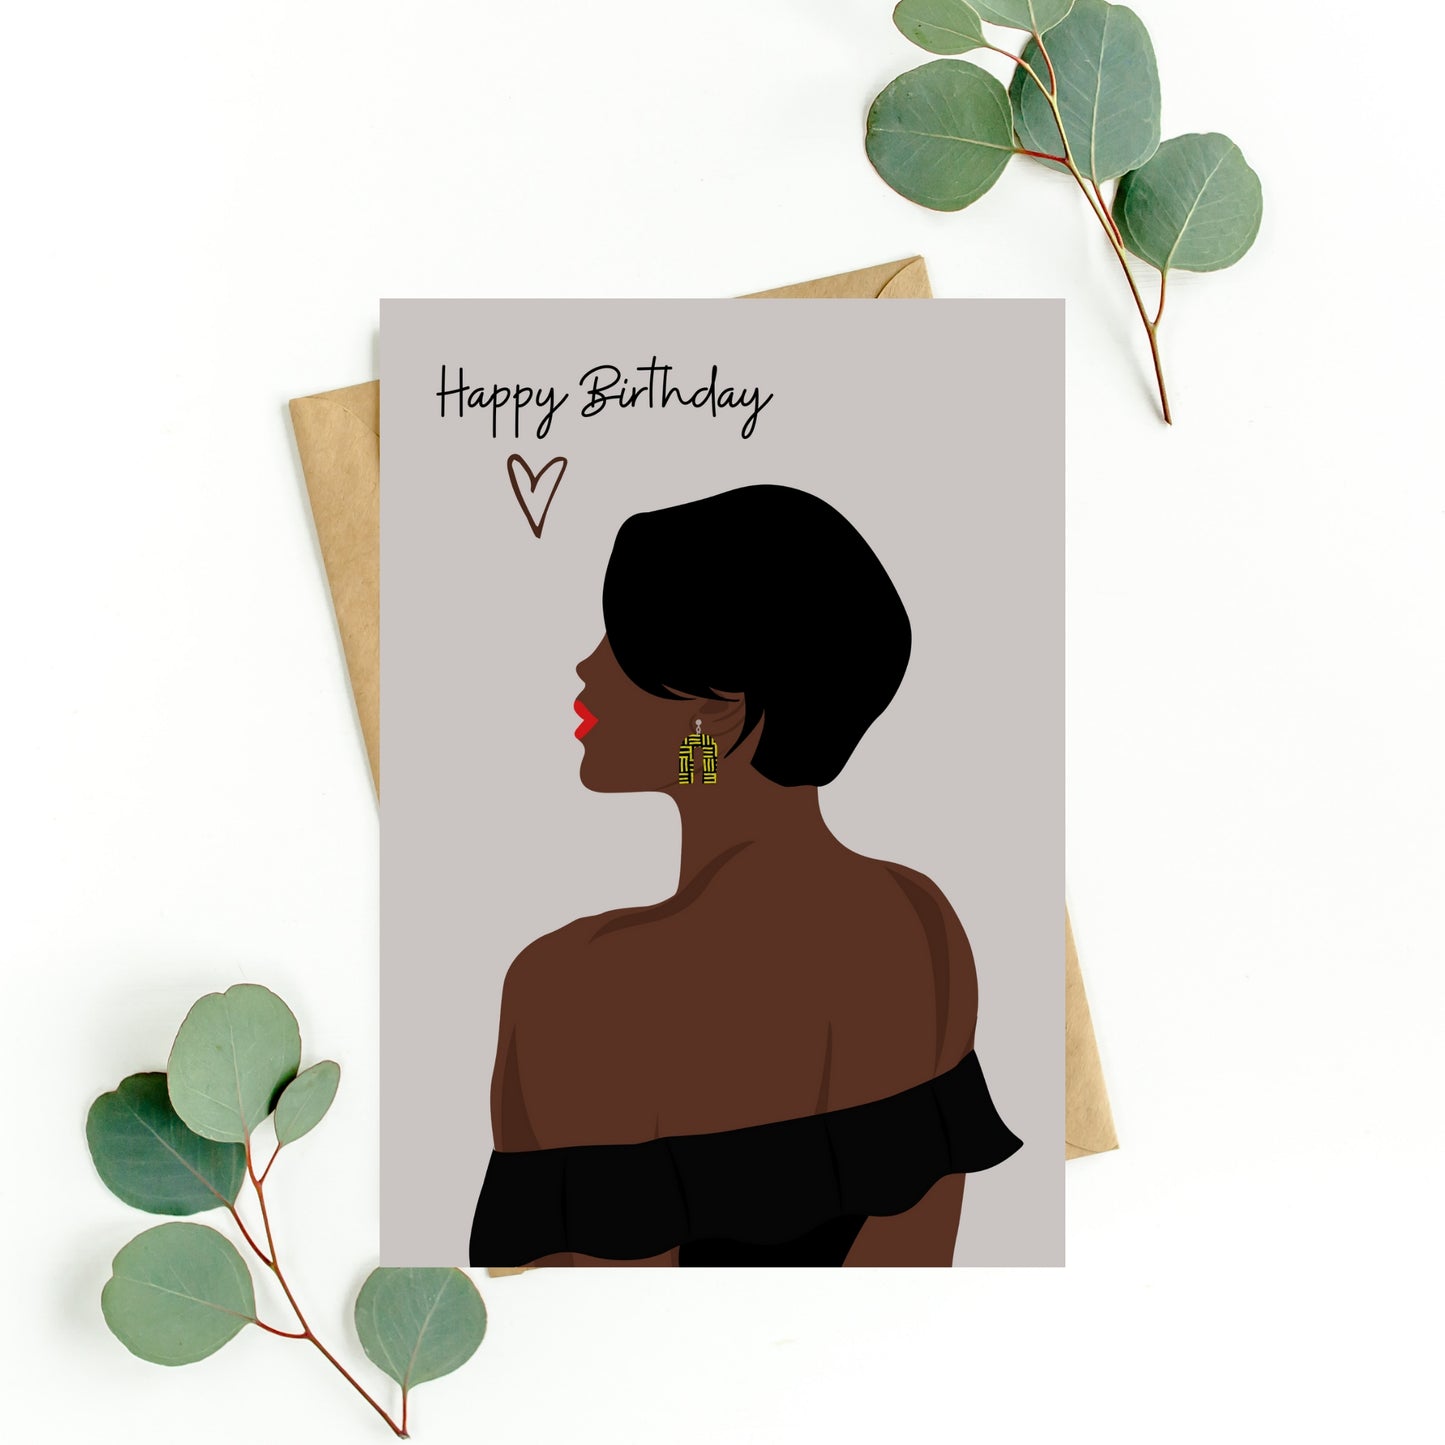 Afro chic woman birthday card